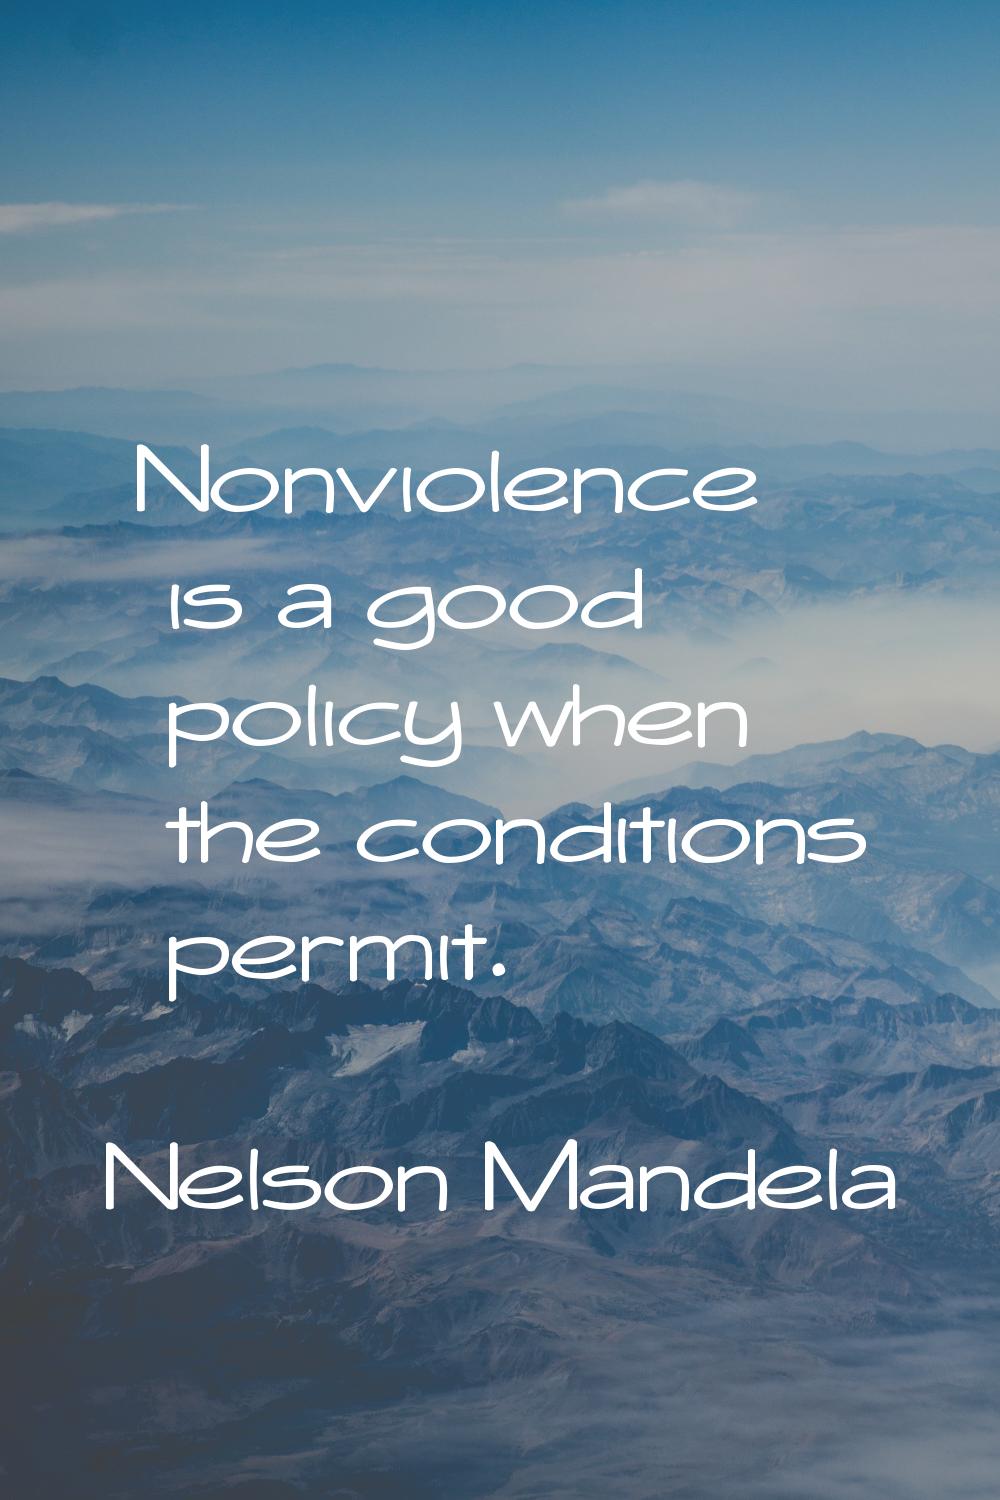 Nonviolence is a good policy when the conditions permit.